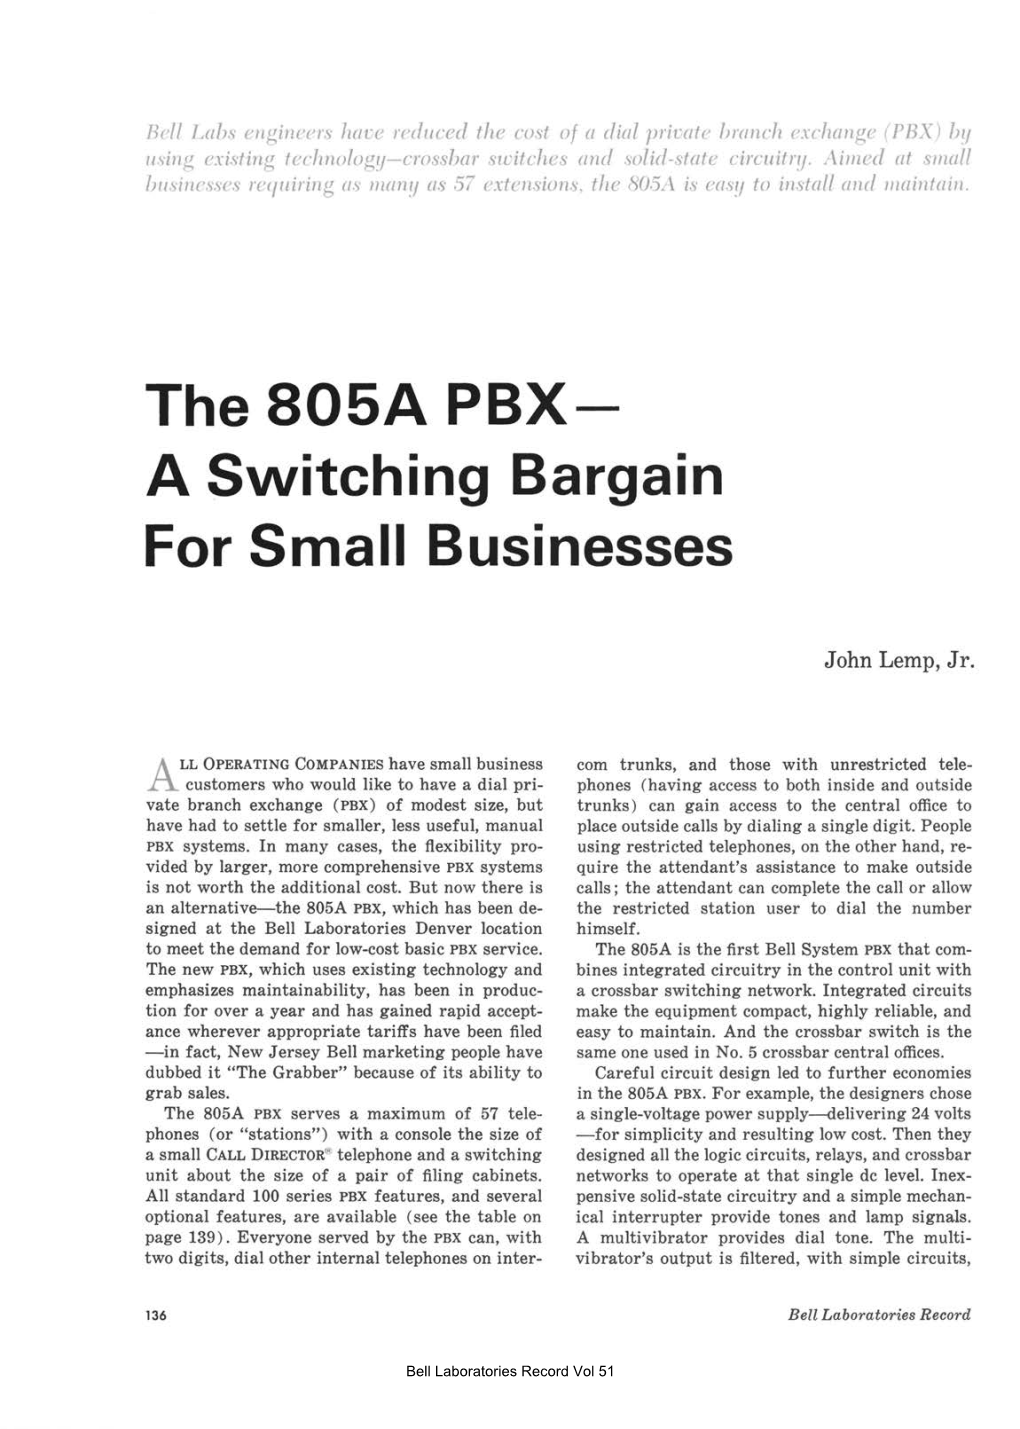 The 805A PBX- a Switching Bargain for Small Businesses